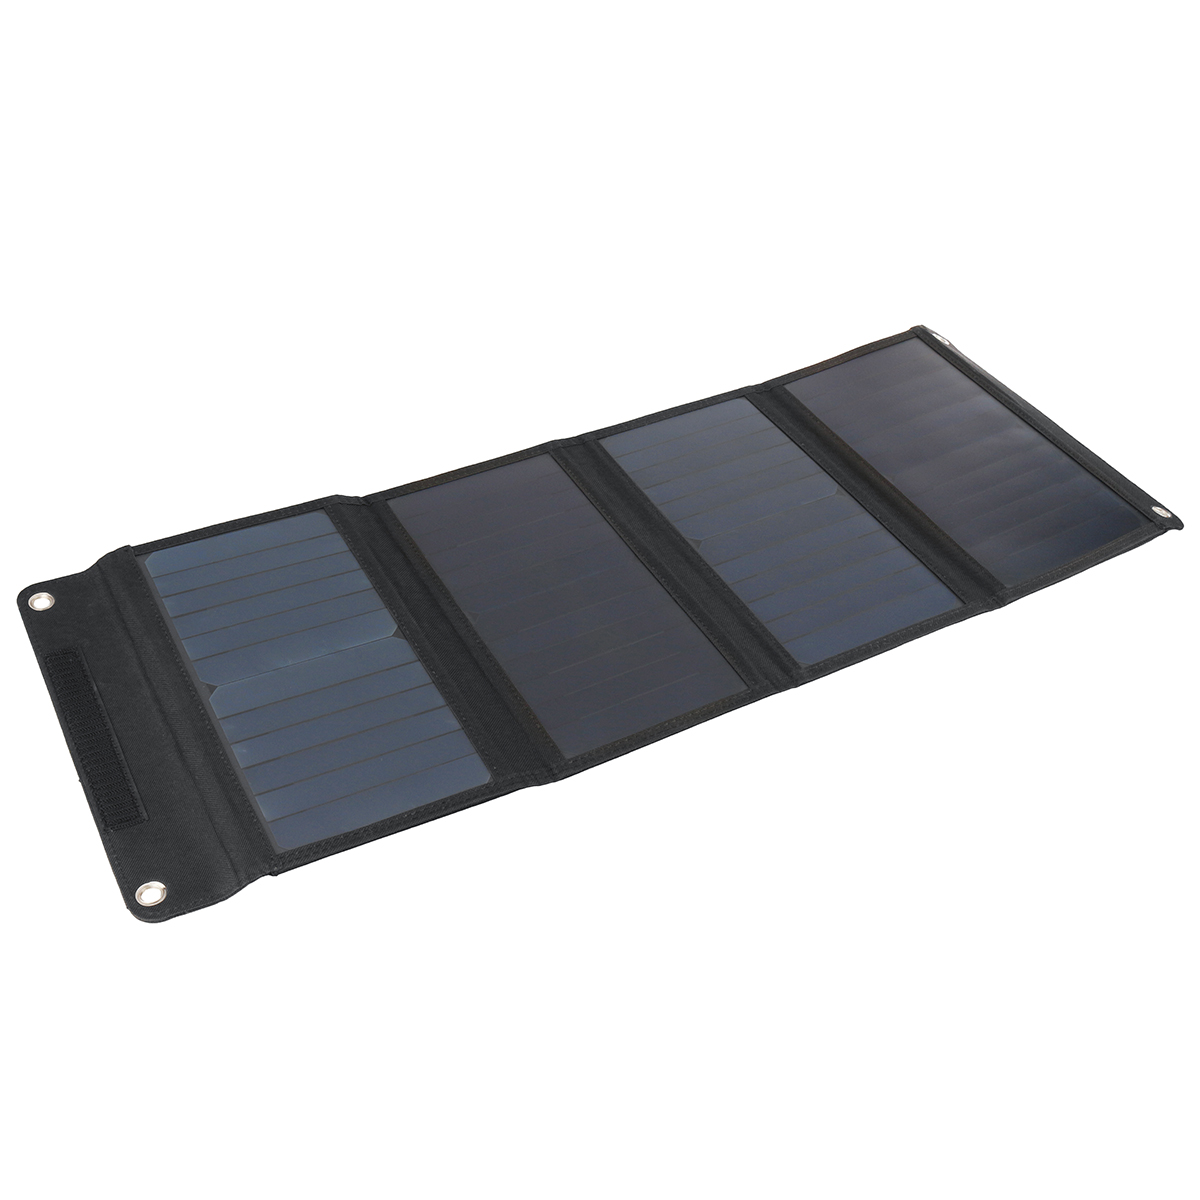 LEORY-28W-12V-Flodable-Solar-Panel-Sunpower-Cell-Panel-Solar-Charger-Generator-for-Smartphone-Tablet-1880494-6